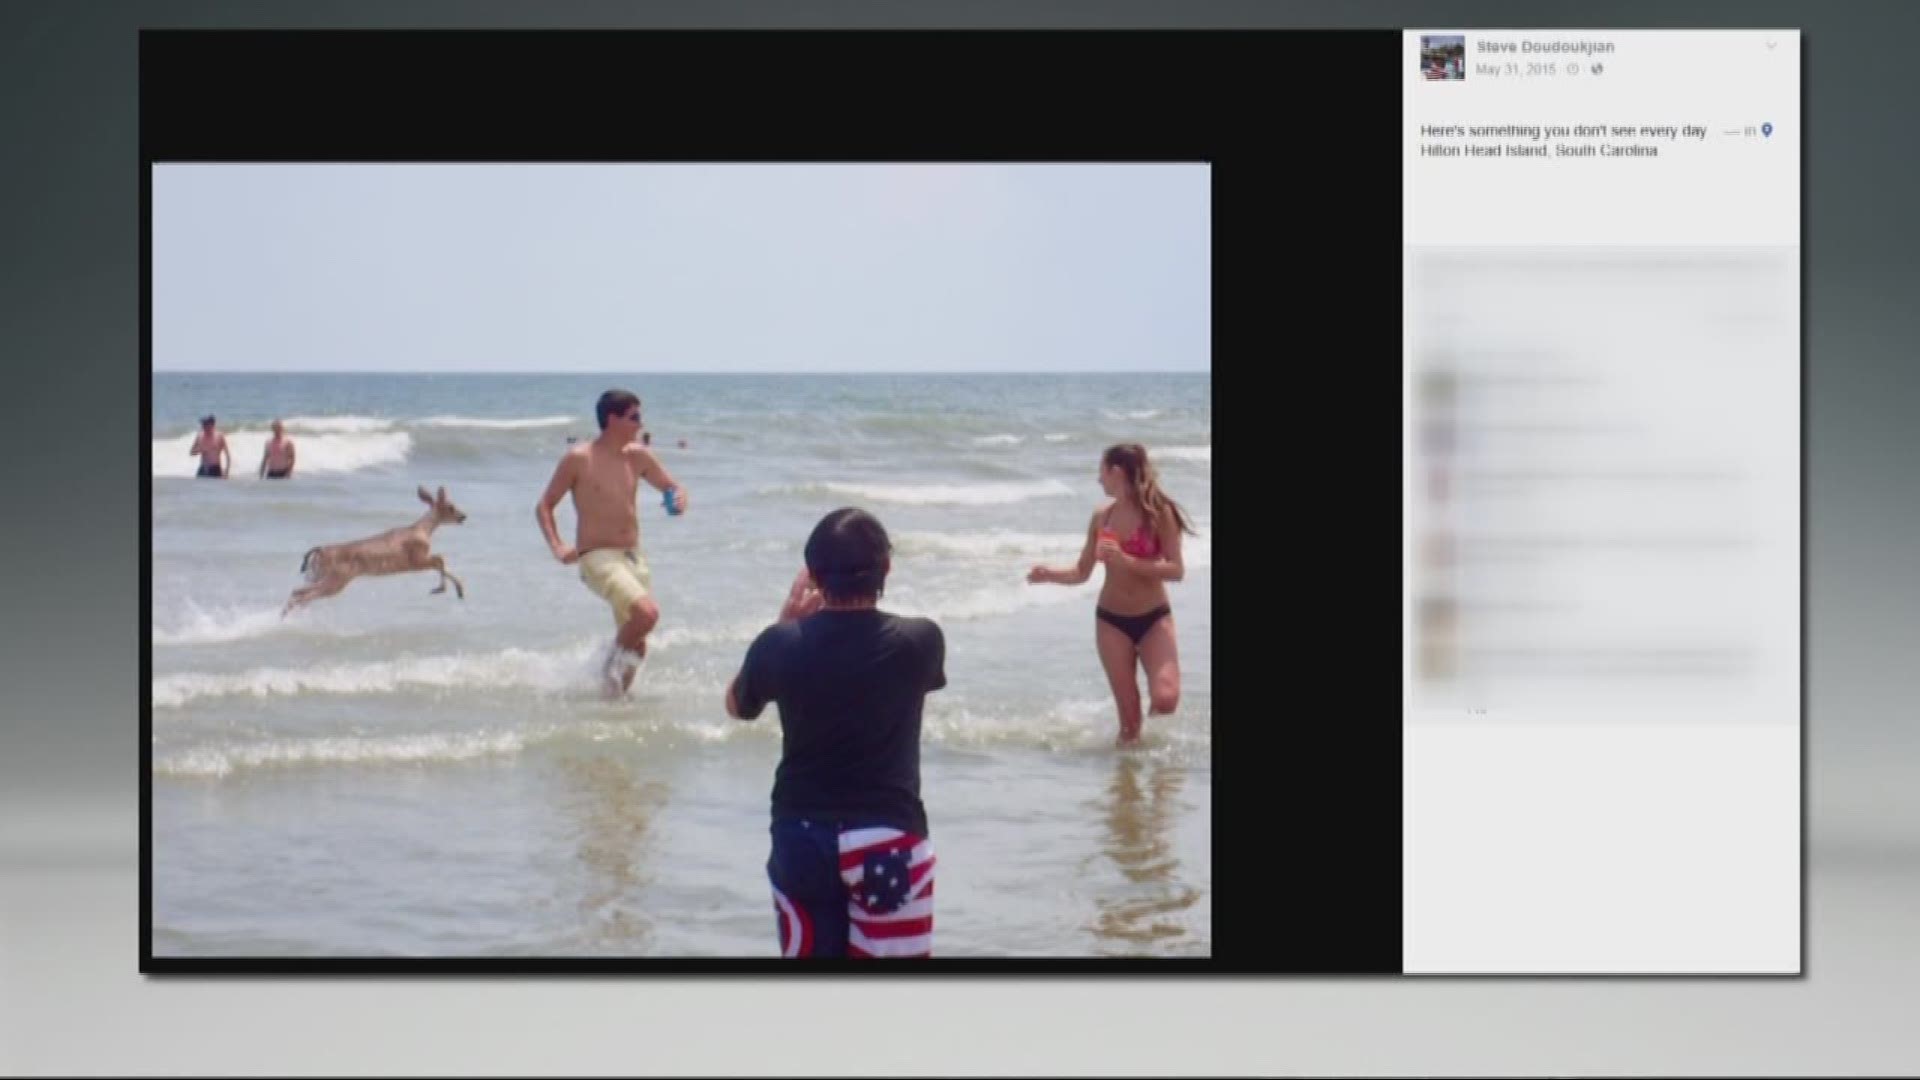 A deer surprised swimmers on Hilton Head Island after darting onto the beach earlier this week.